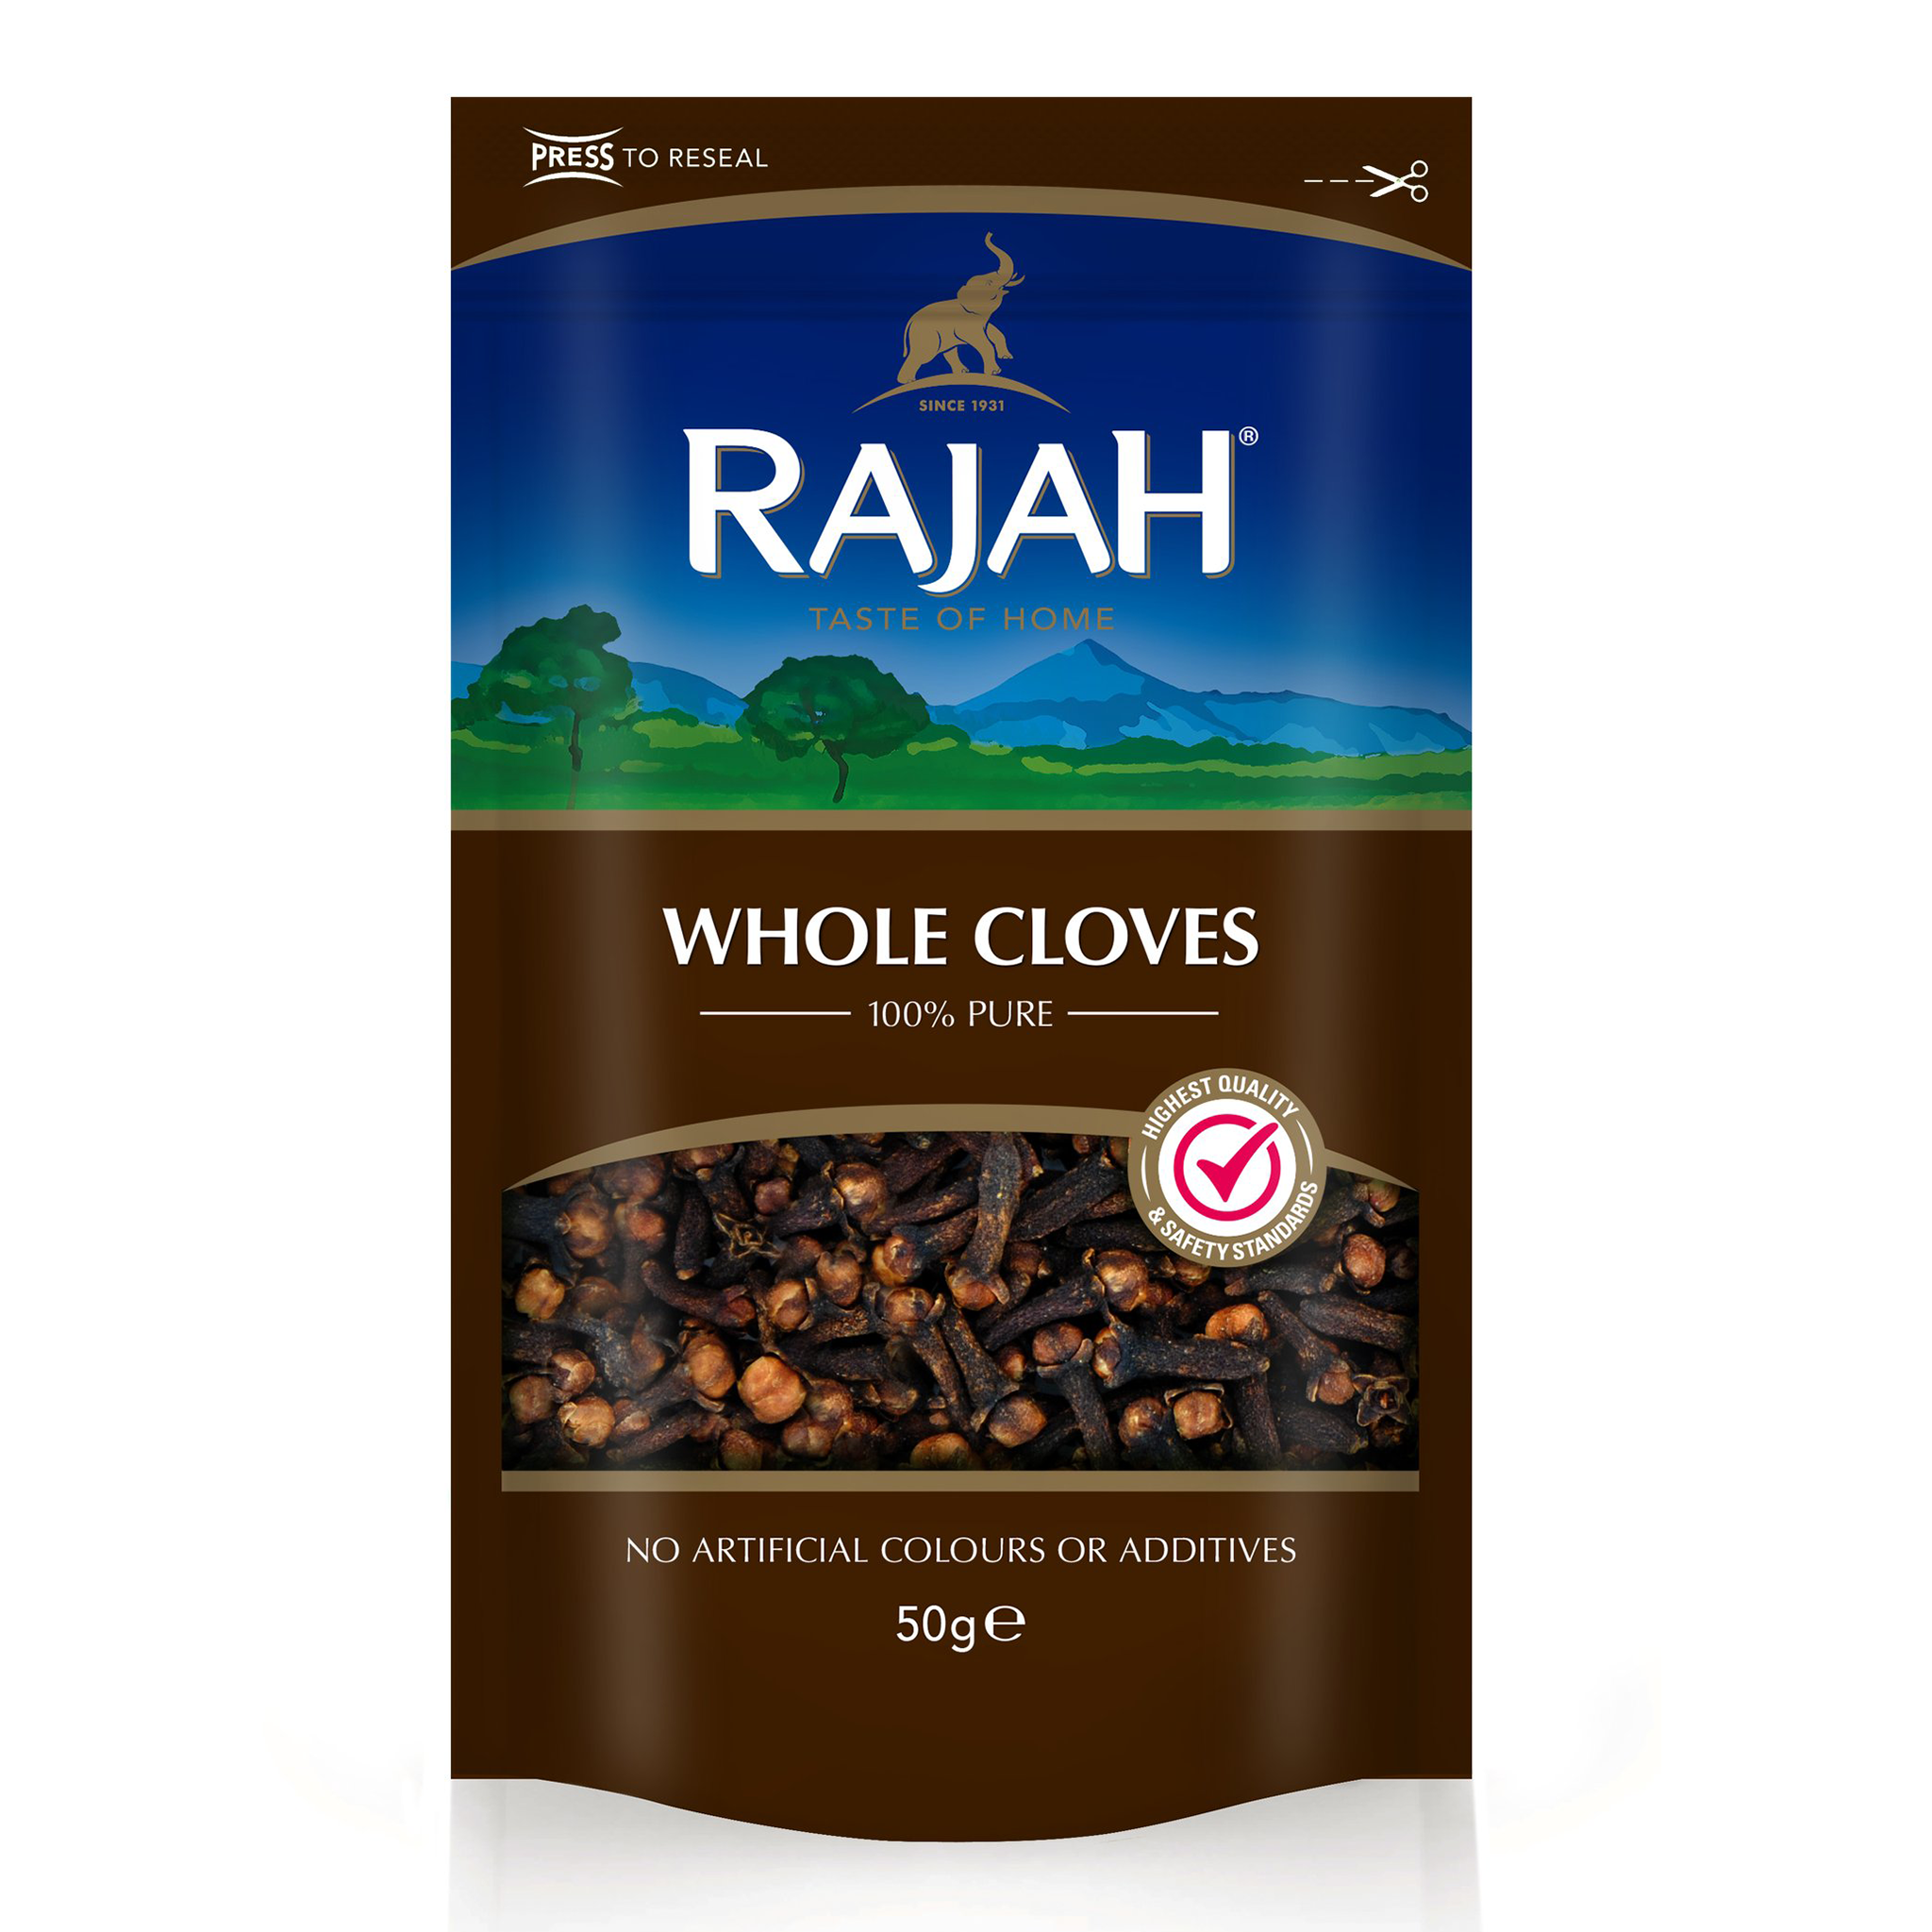 Whole Cloves 50g by Rajah